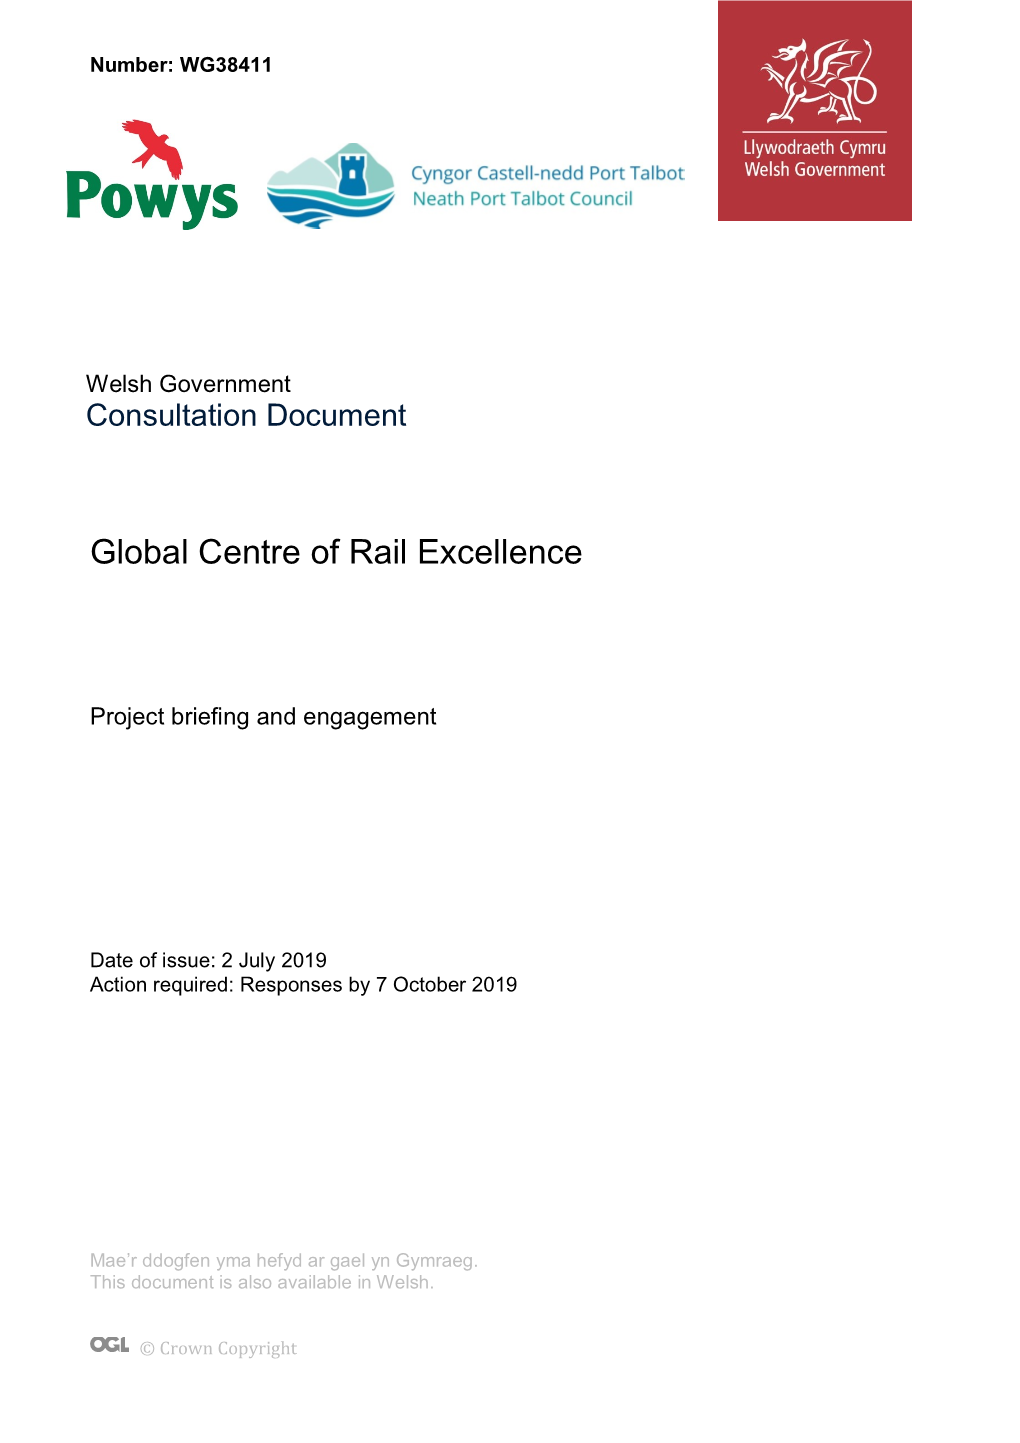 Global Centre of Rail Excellence